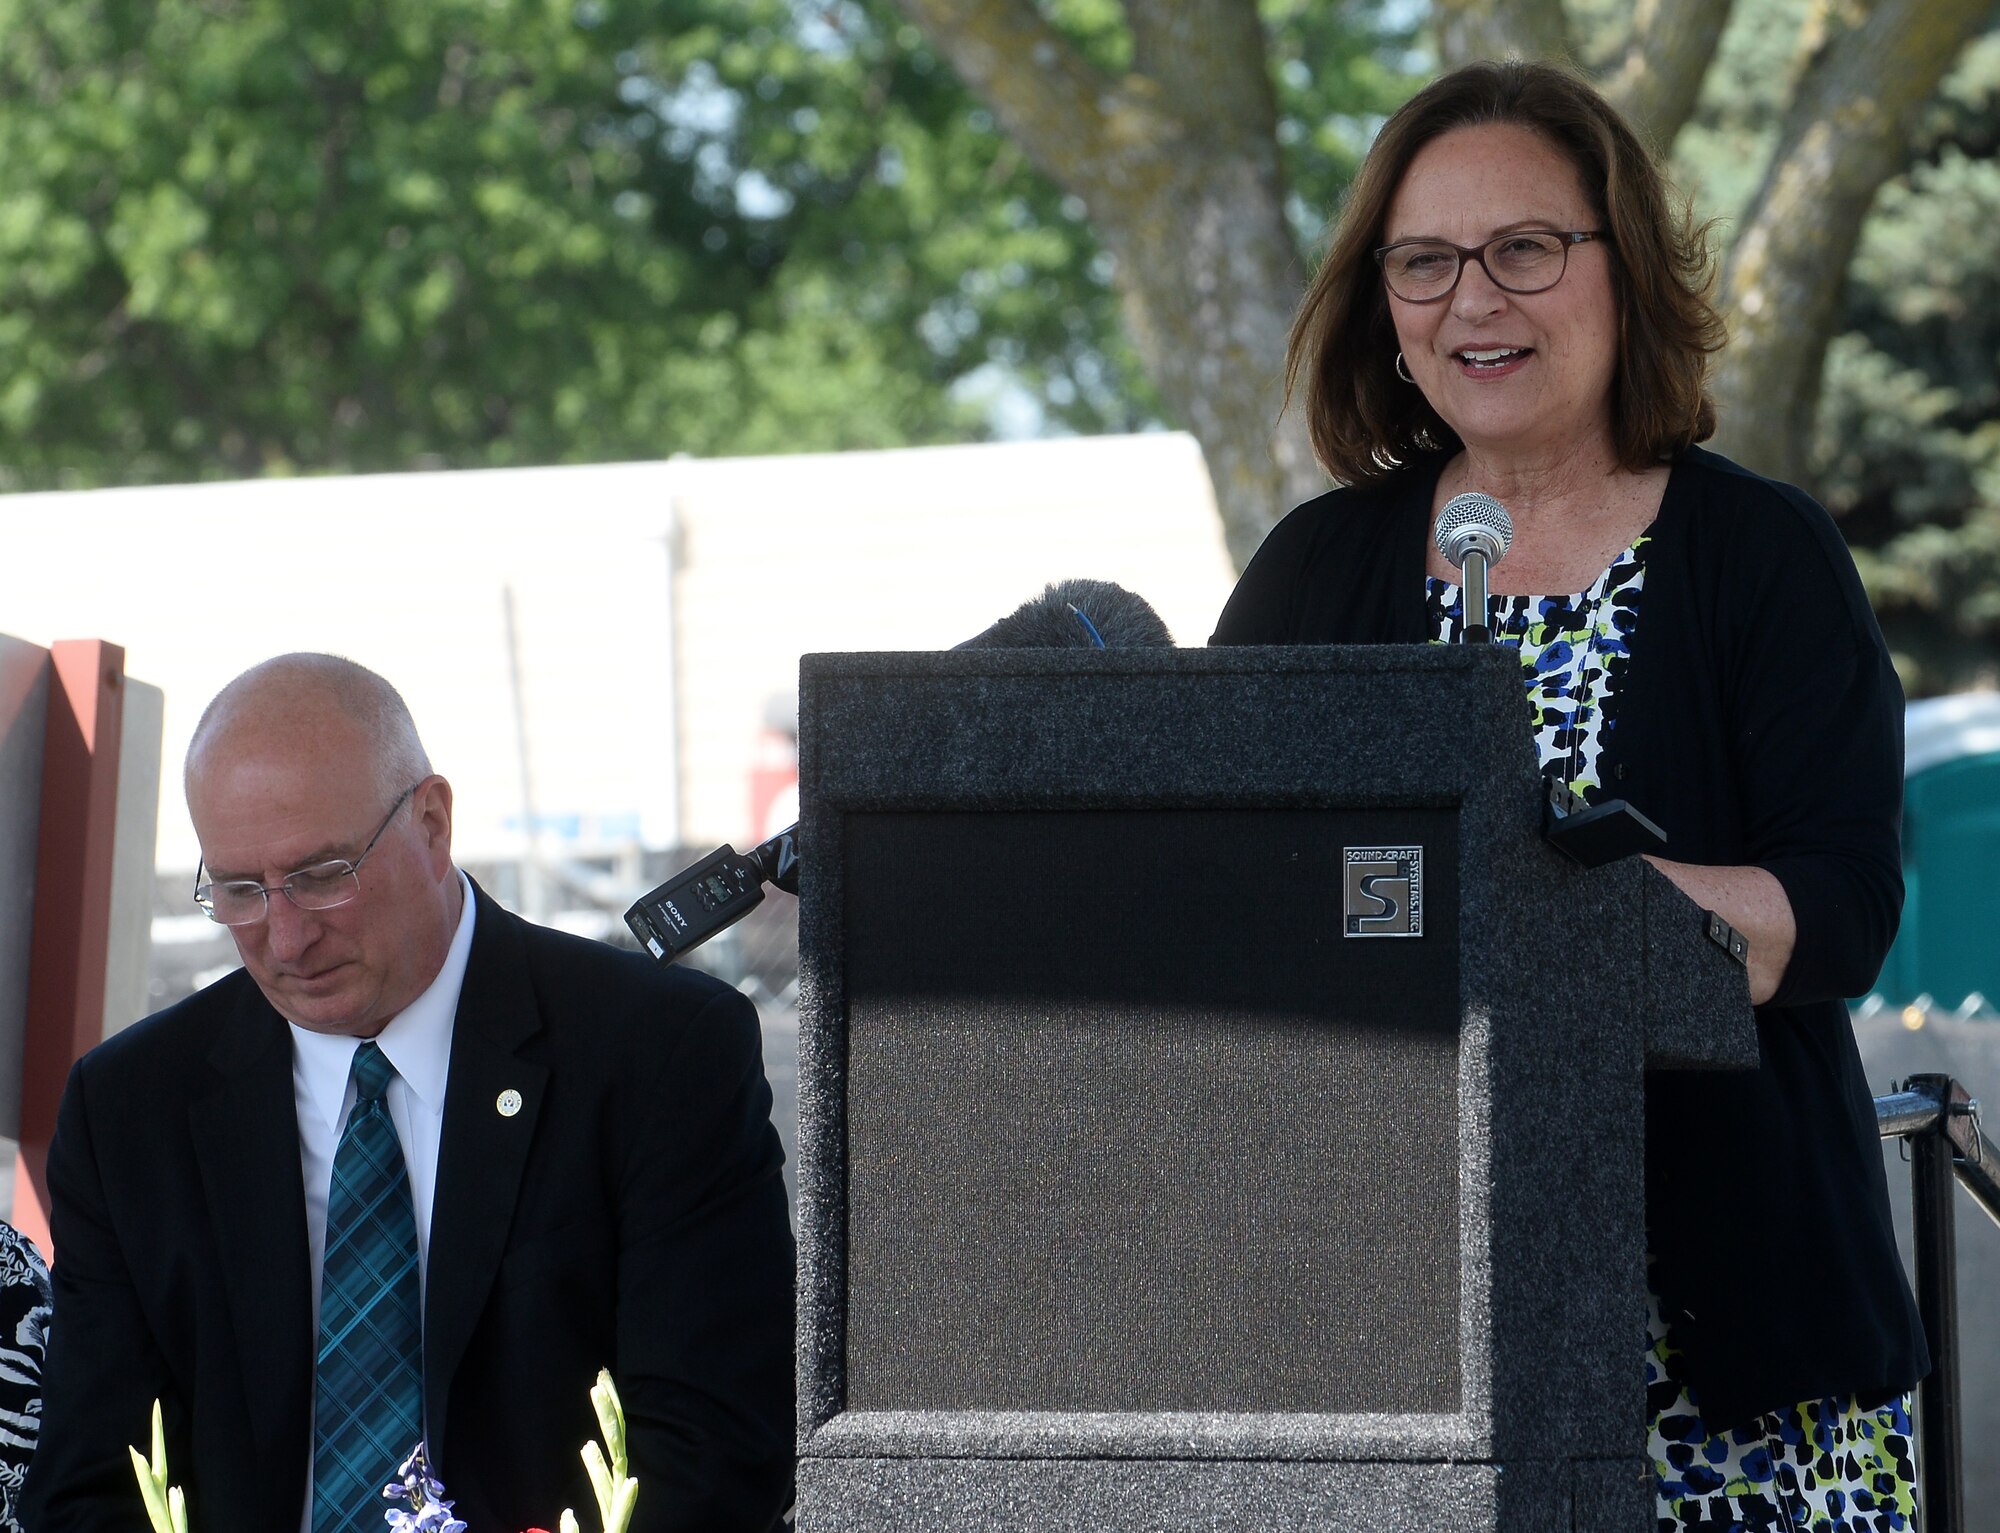 Deb Fischer, United States Senator, gives remarks during the groundbreaking ceremony for the Fisher House project at the Veteran Affairs Medical Center in Omaha, Nebraska Aug. 7, 2019. The new housing will open in 2020 and be able to accommodate up to 16 families of veterans, military servicemen and their families.